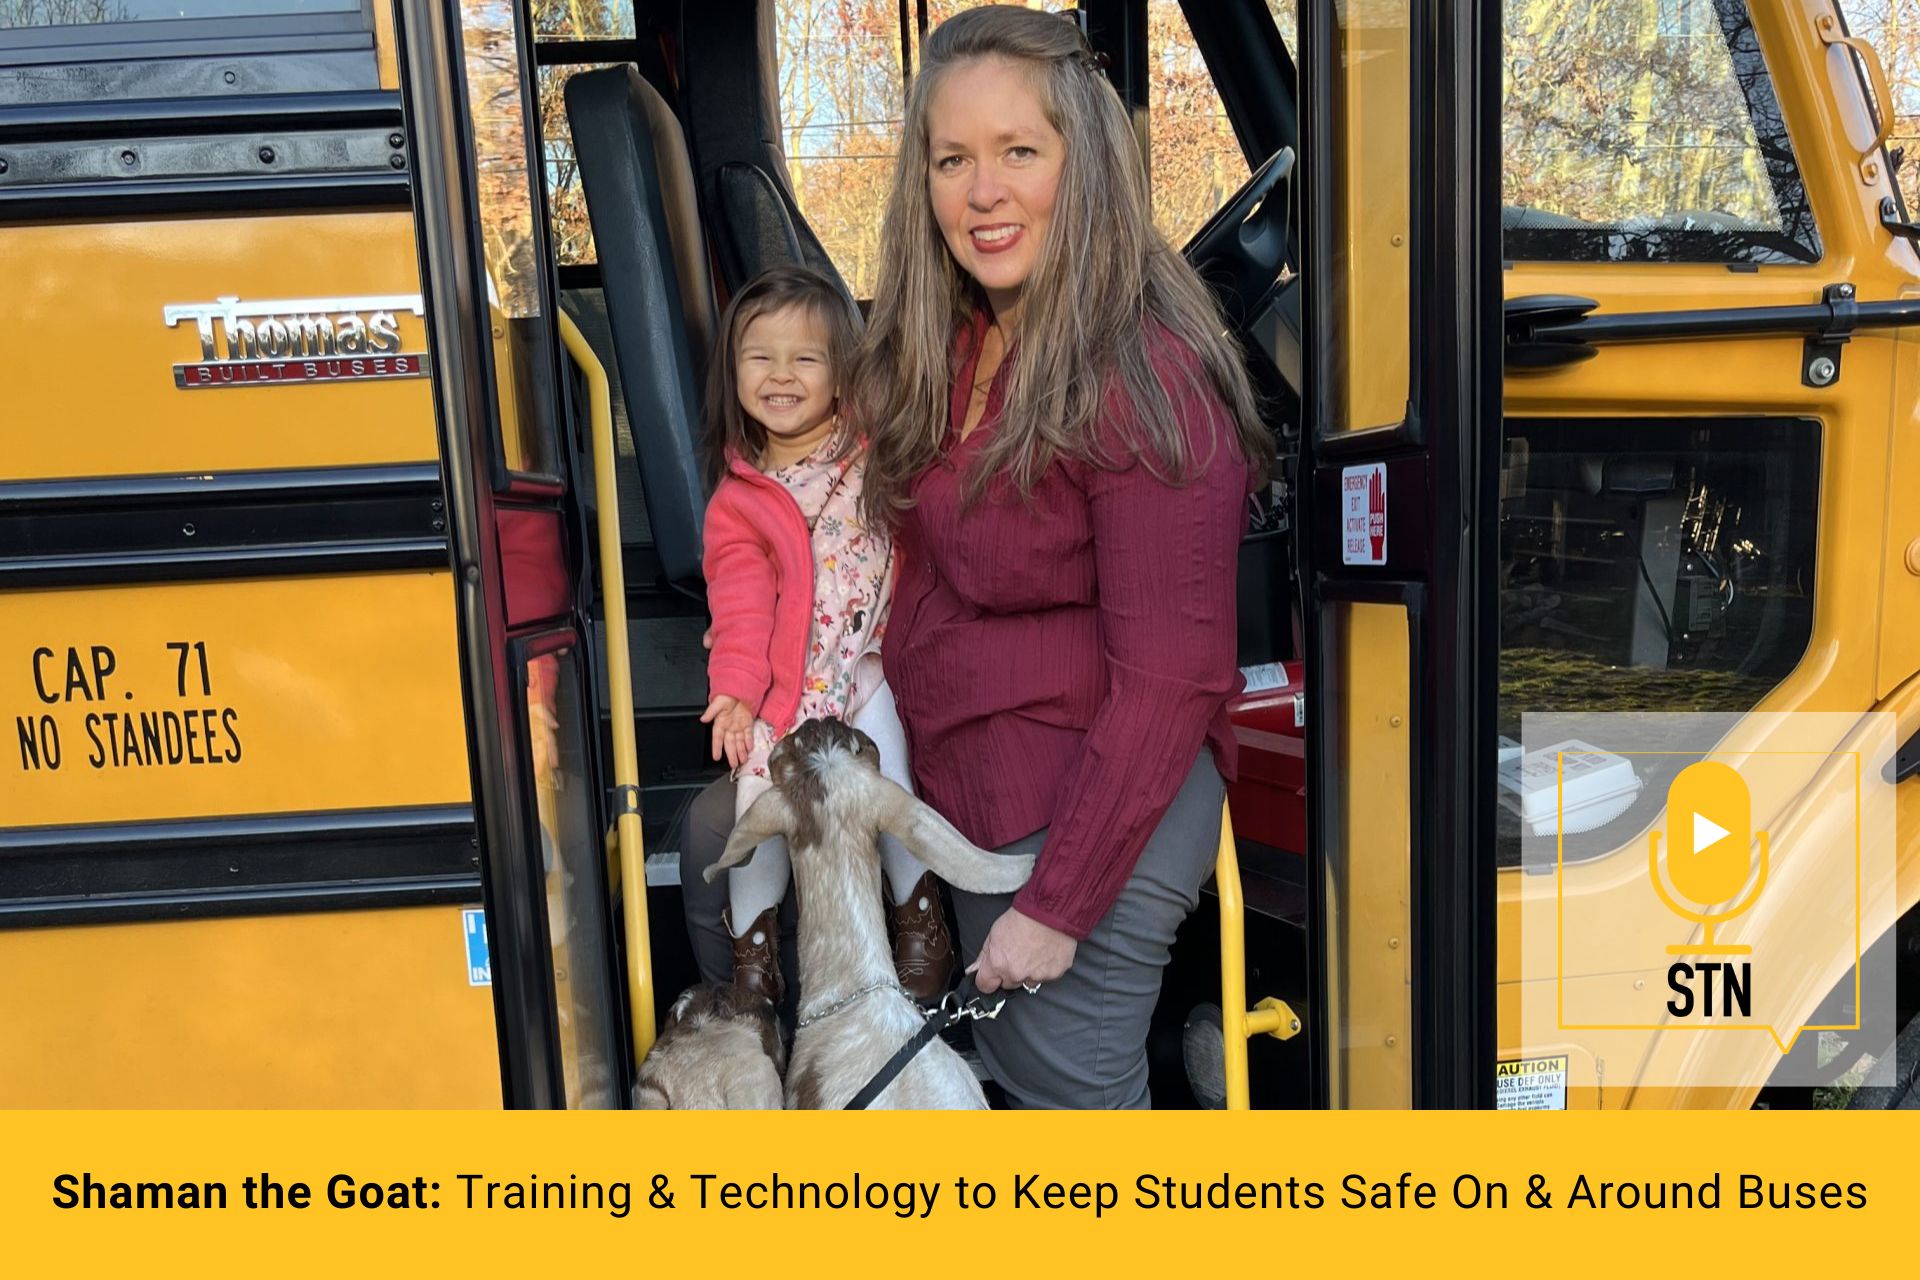 Shaman the Goat: Strategies for Ensuring Student Safety On and Around Buses with Training and Technology